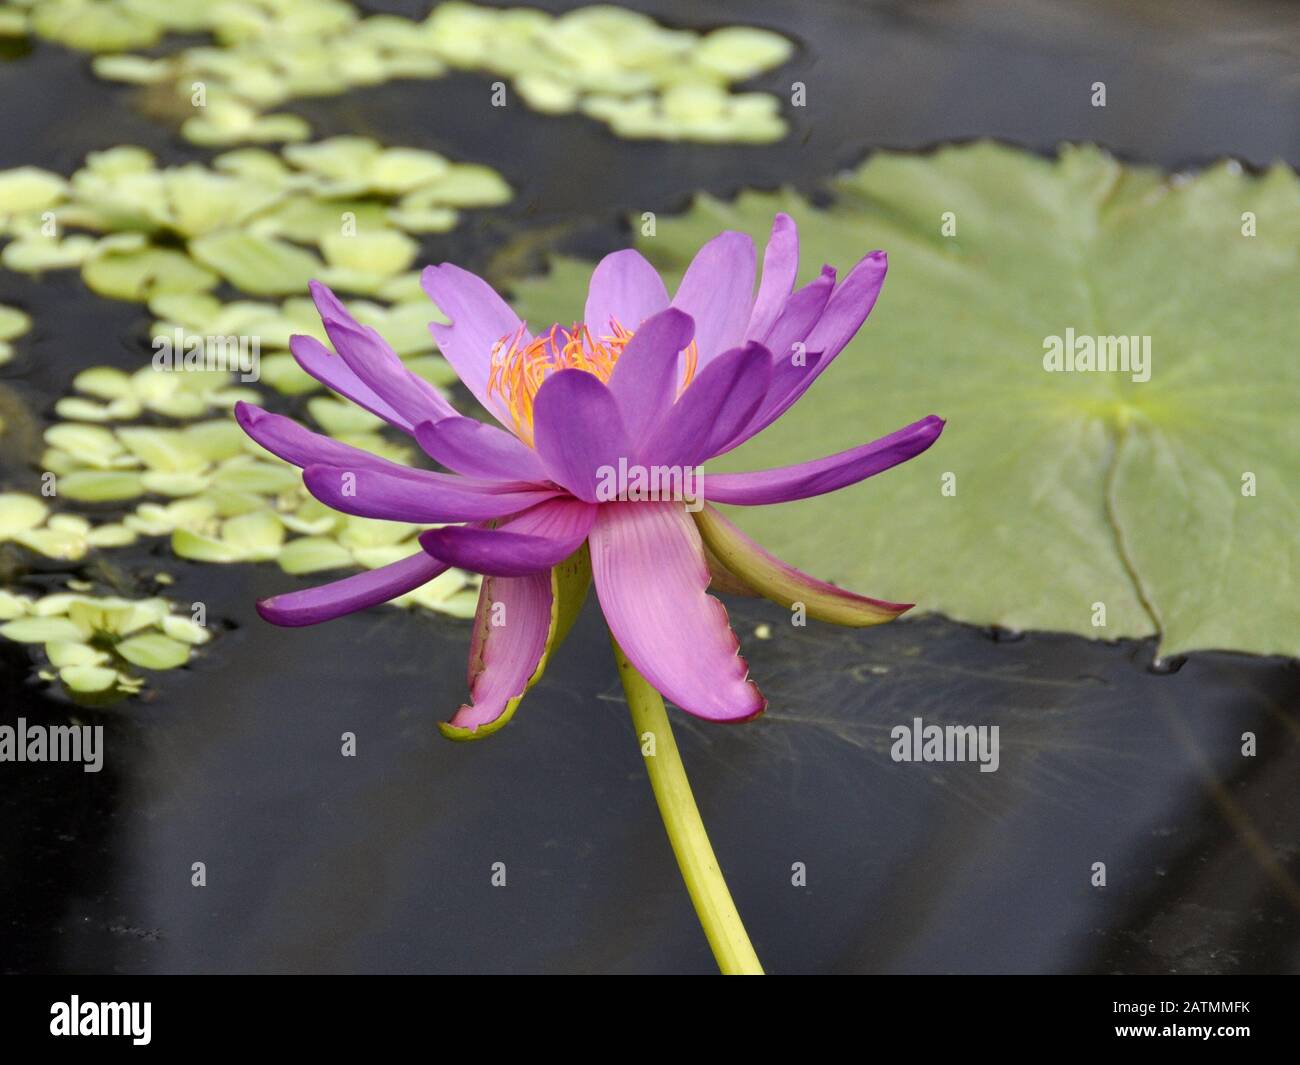 Closeup on the flower of a water lily Nymphaea sp. Stock Photo